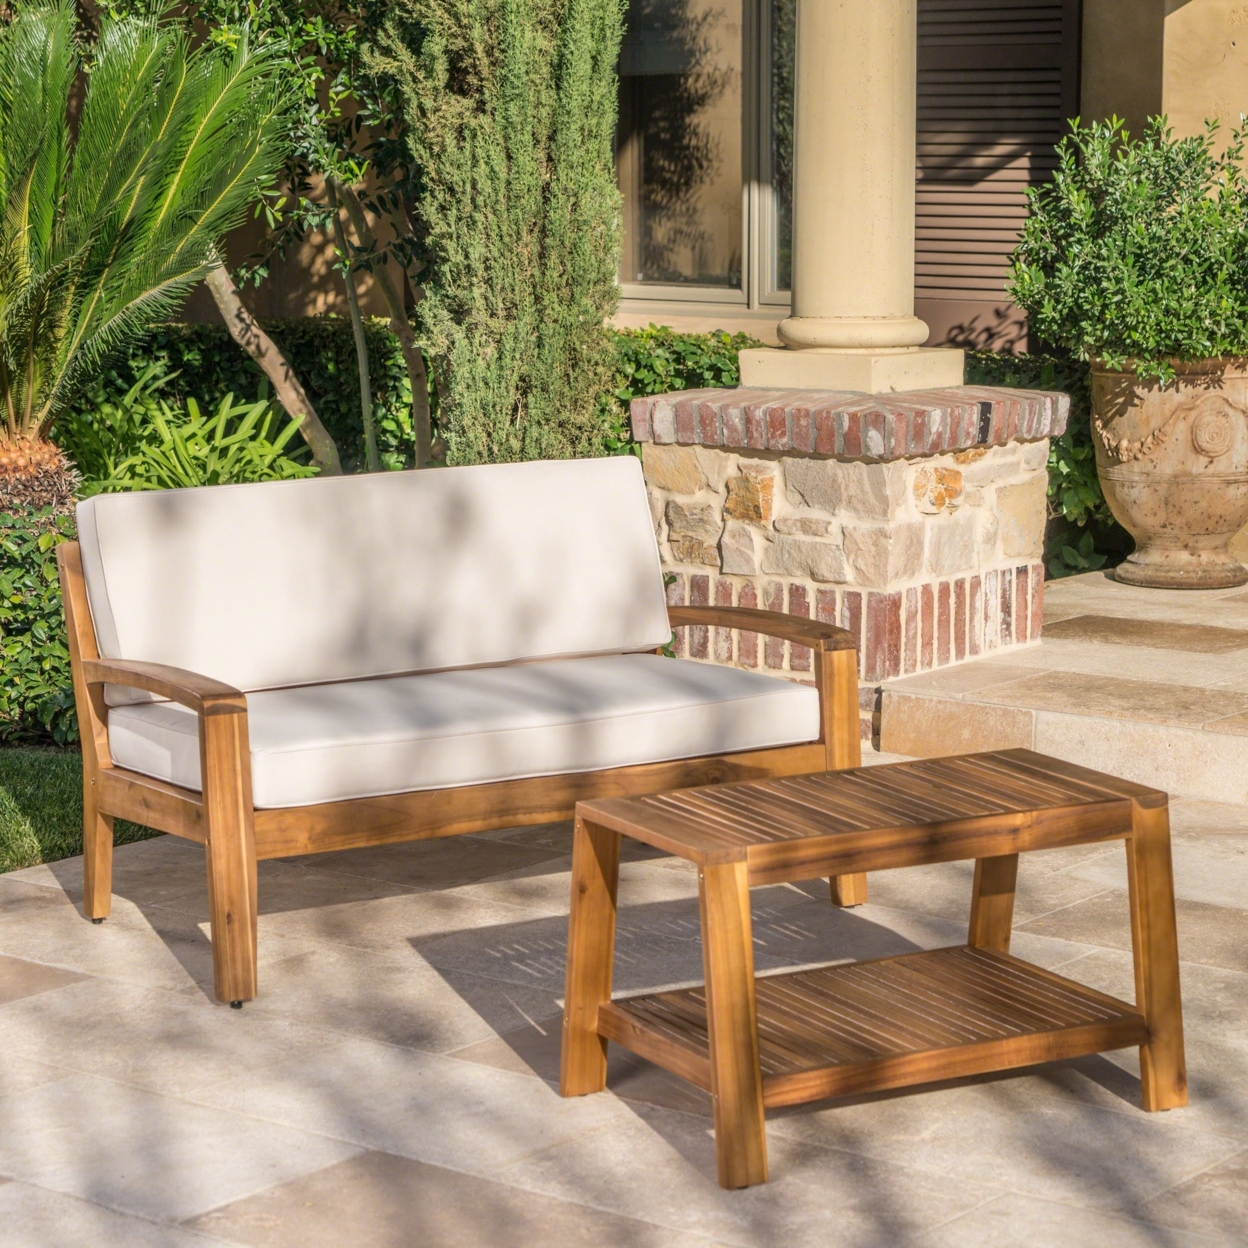 Christian Outdoor Acacia Wood Loveseat And Coffee Table Set With Cushions - Teak Finish/beige